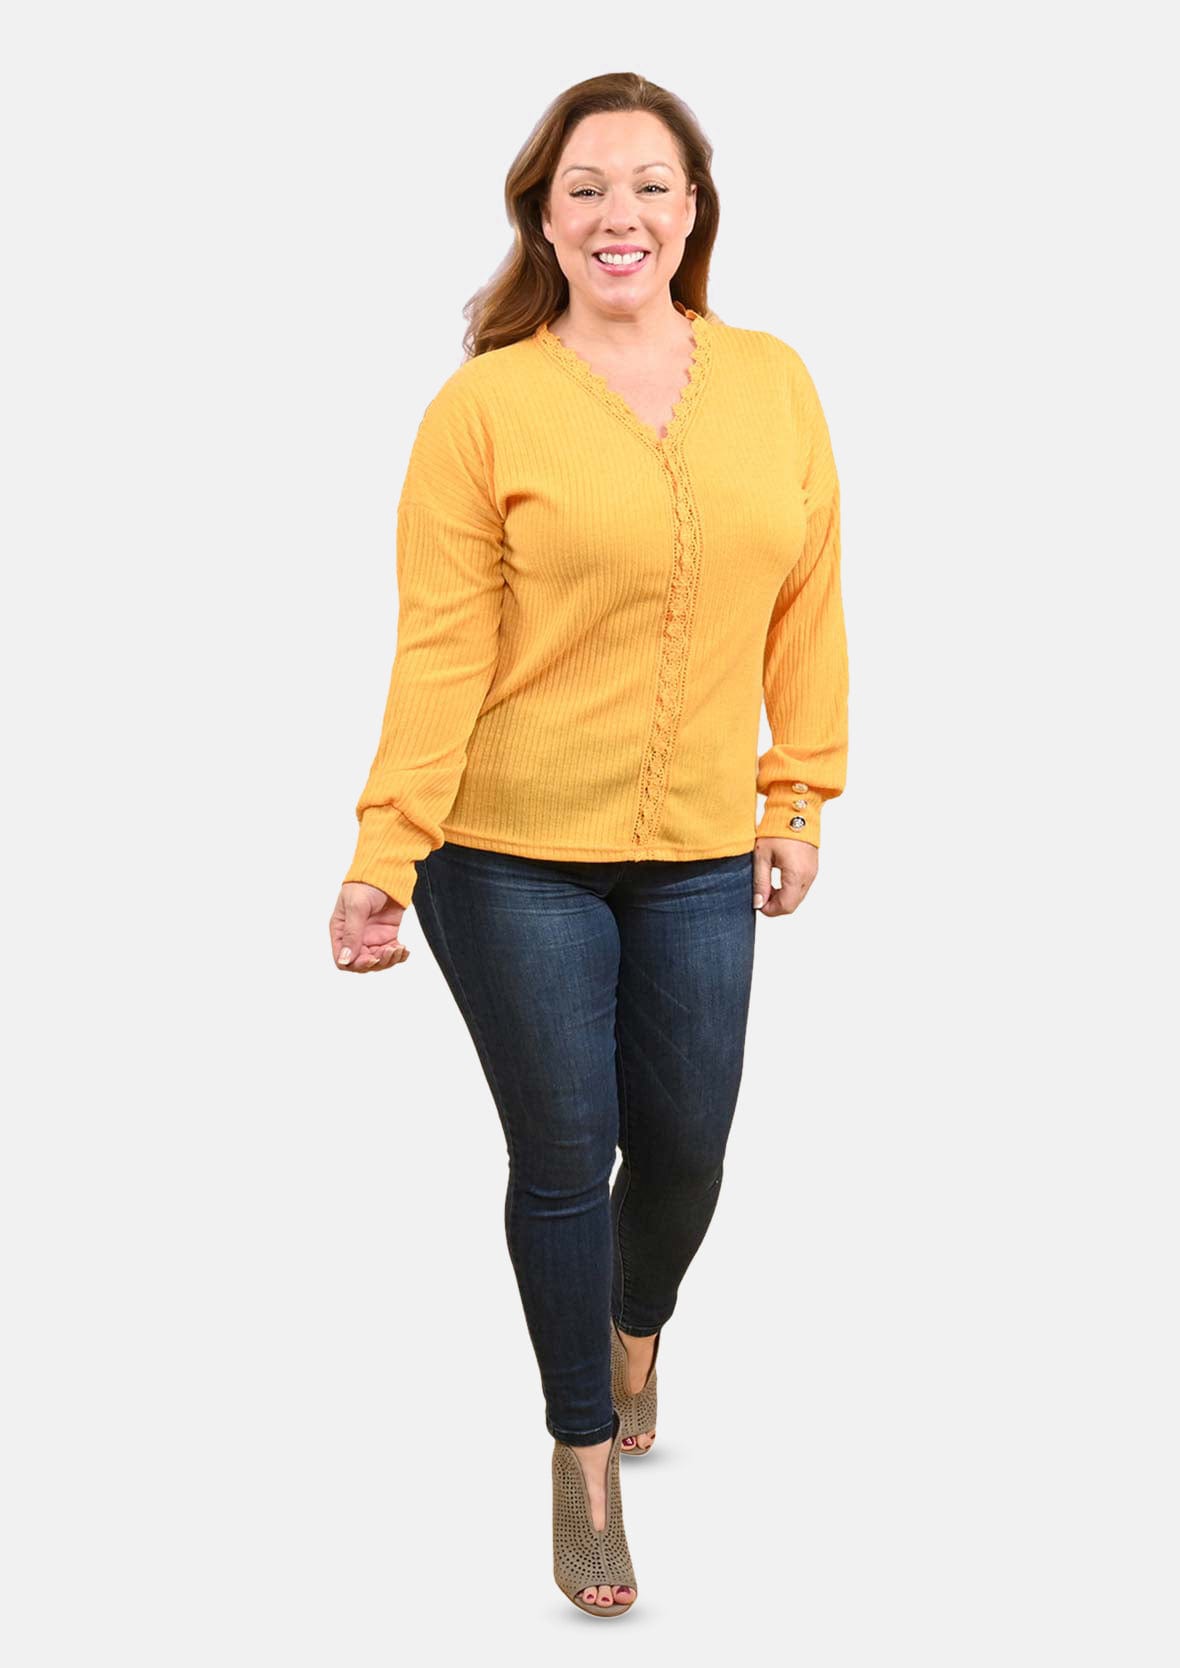 lace trim v-neck knit yellow sweater #color_Corn Yellow